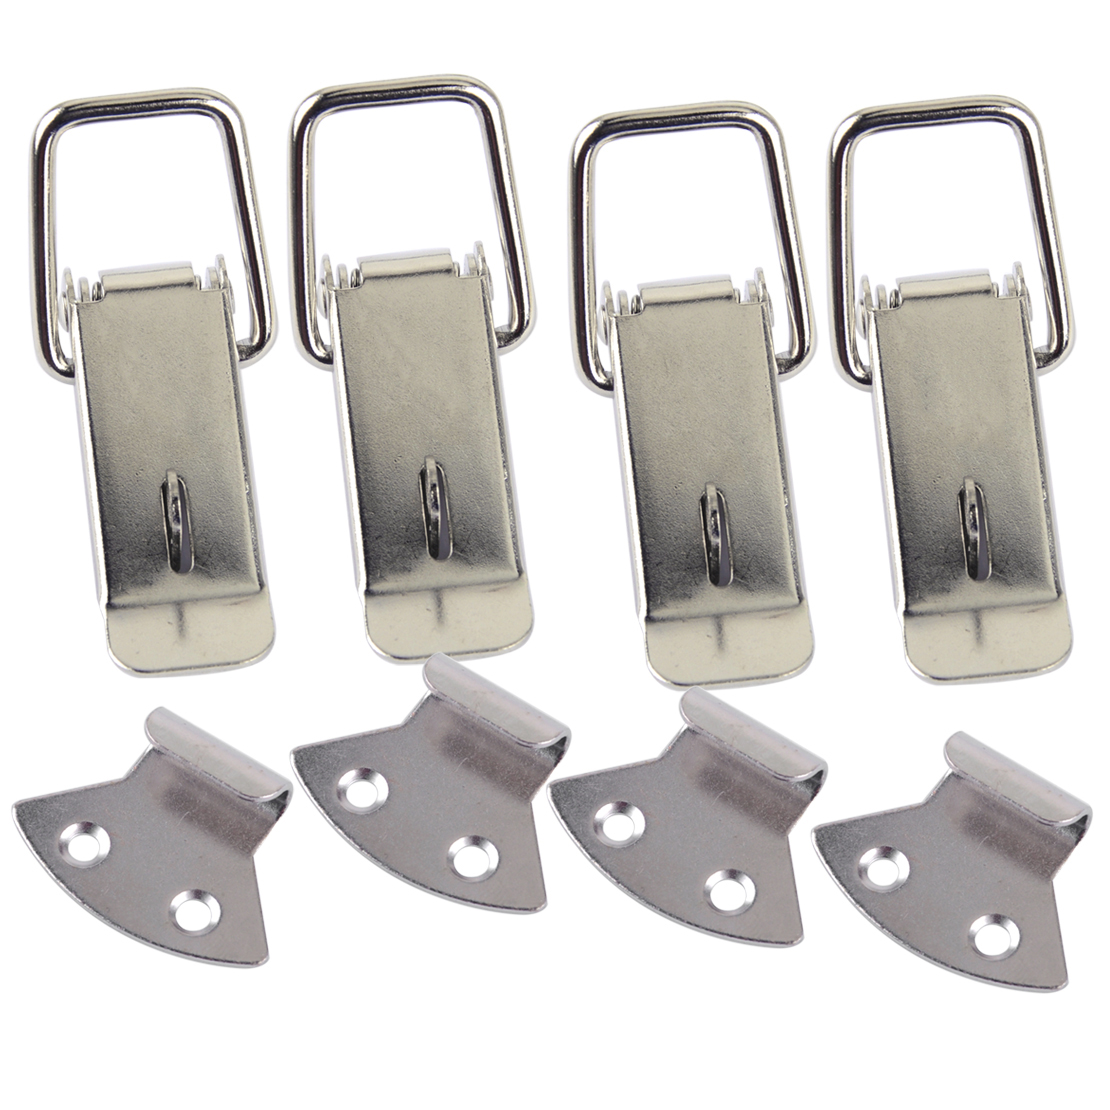 4x Spring Loaded Tone Toggle Latch Hasp Lock Fit For Case Box Draw ...